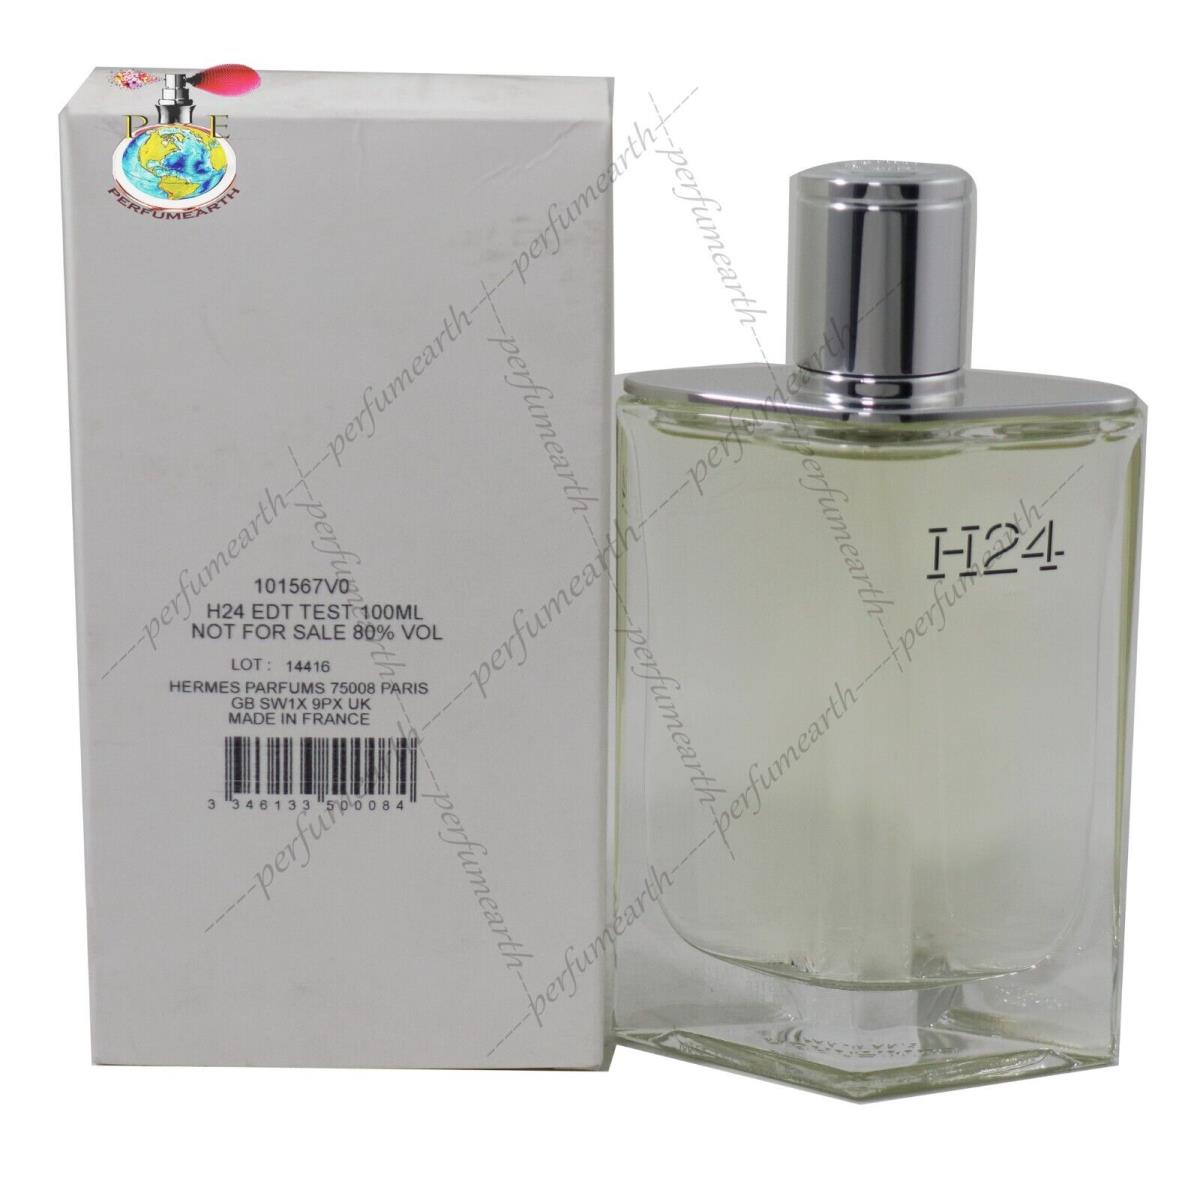 Hermes H24 by Hermes Edt 3.3 / 3.4 oz Spray For Men Unbox Same As Picture